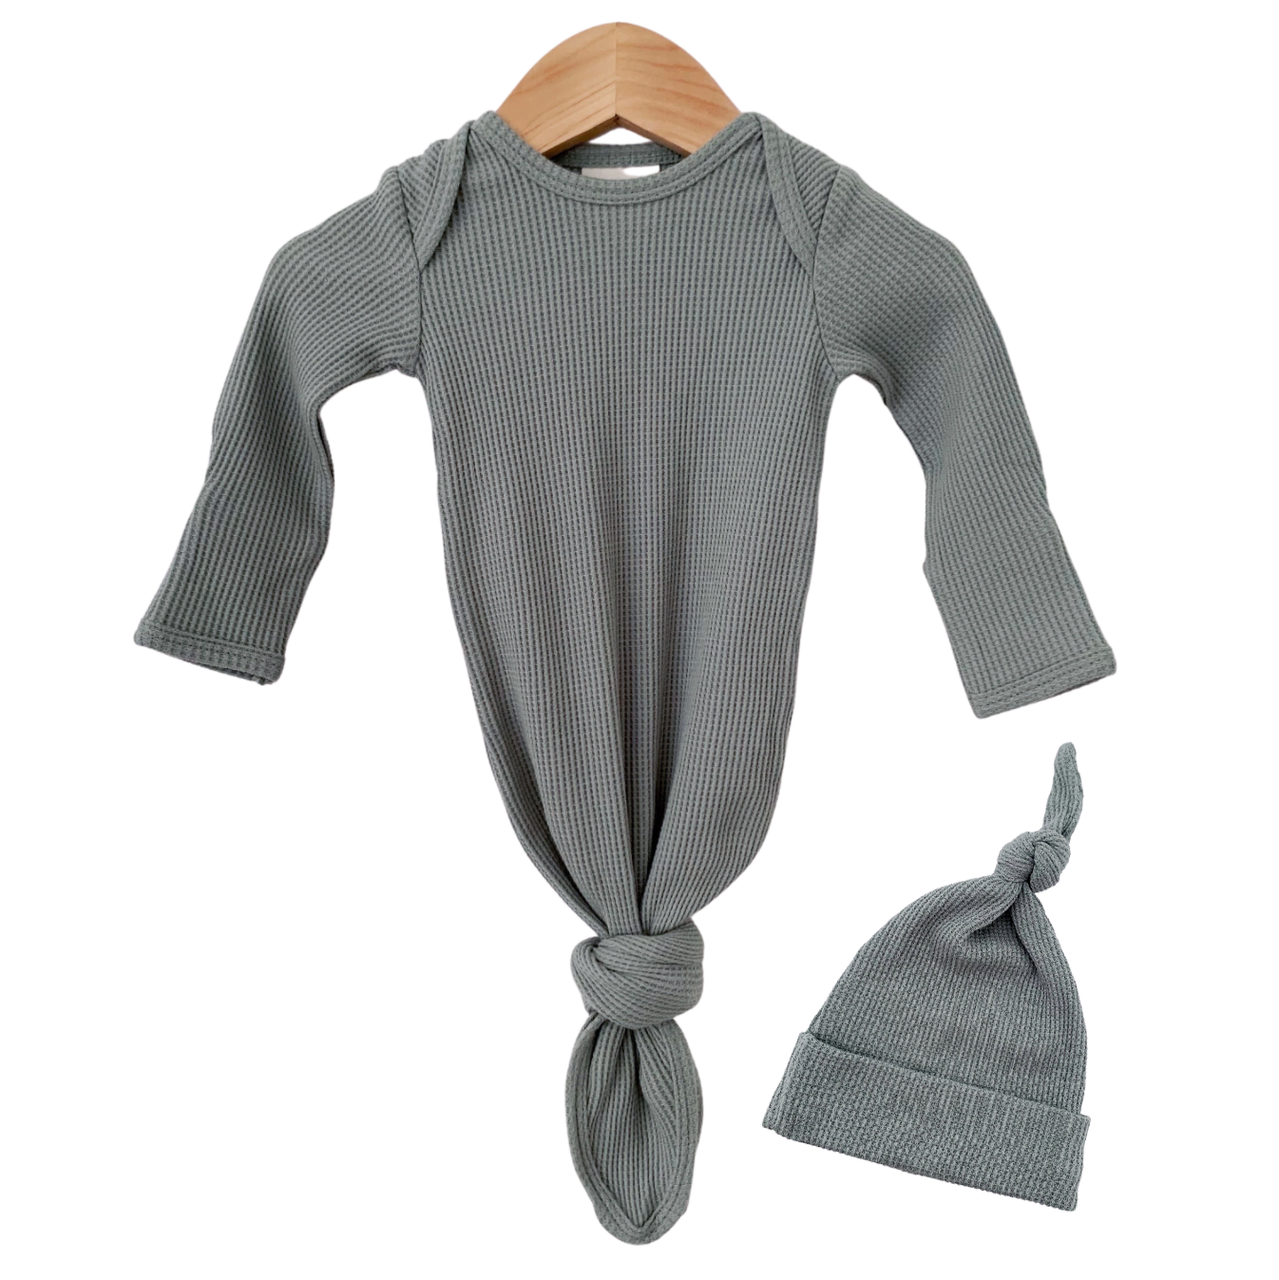 SpearmintLOVE’s baby Organic Waffle Knotted Gown & Hat, Mountain Green